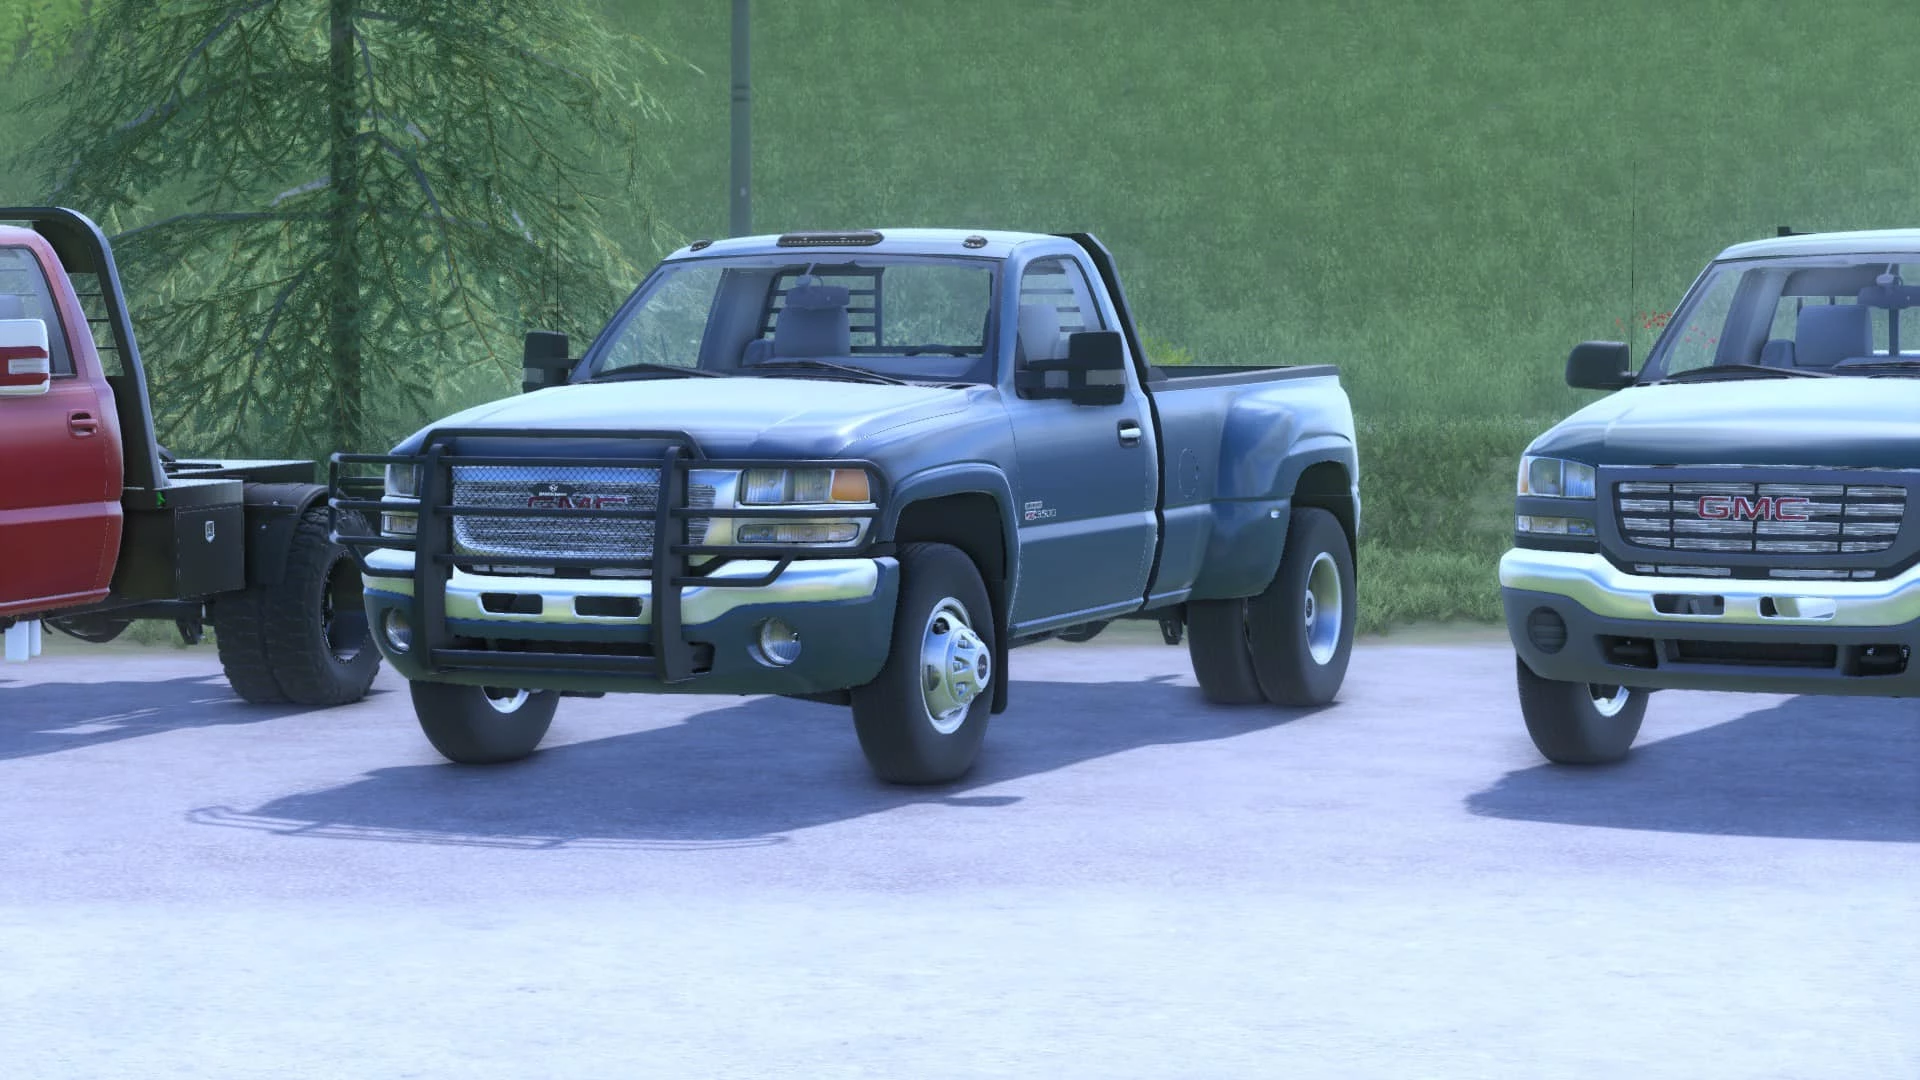 The 2006 gmc single cab is now out for testing!